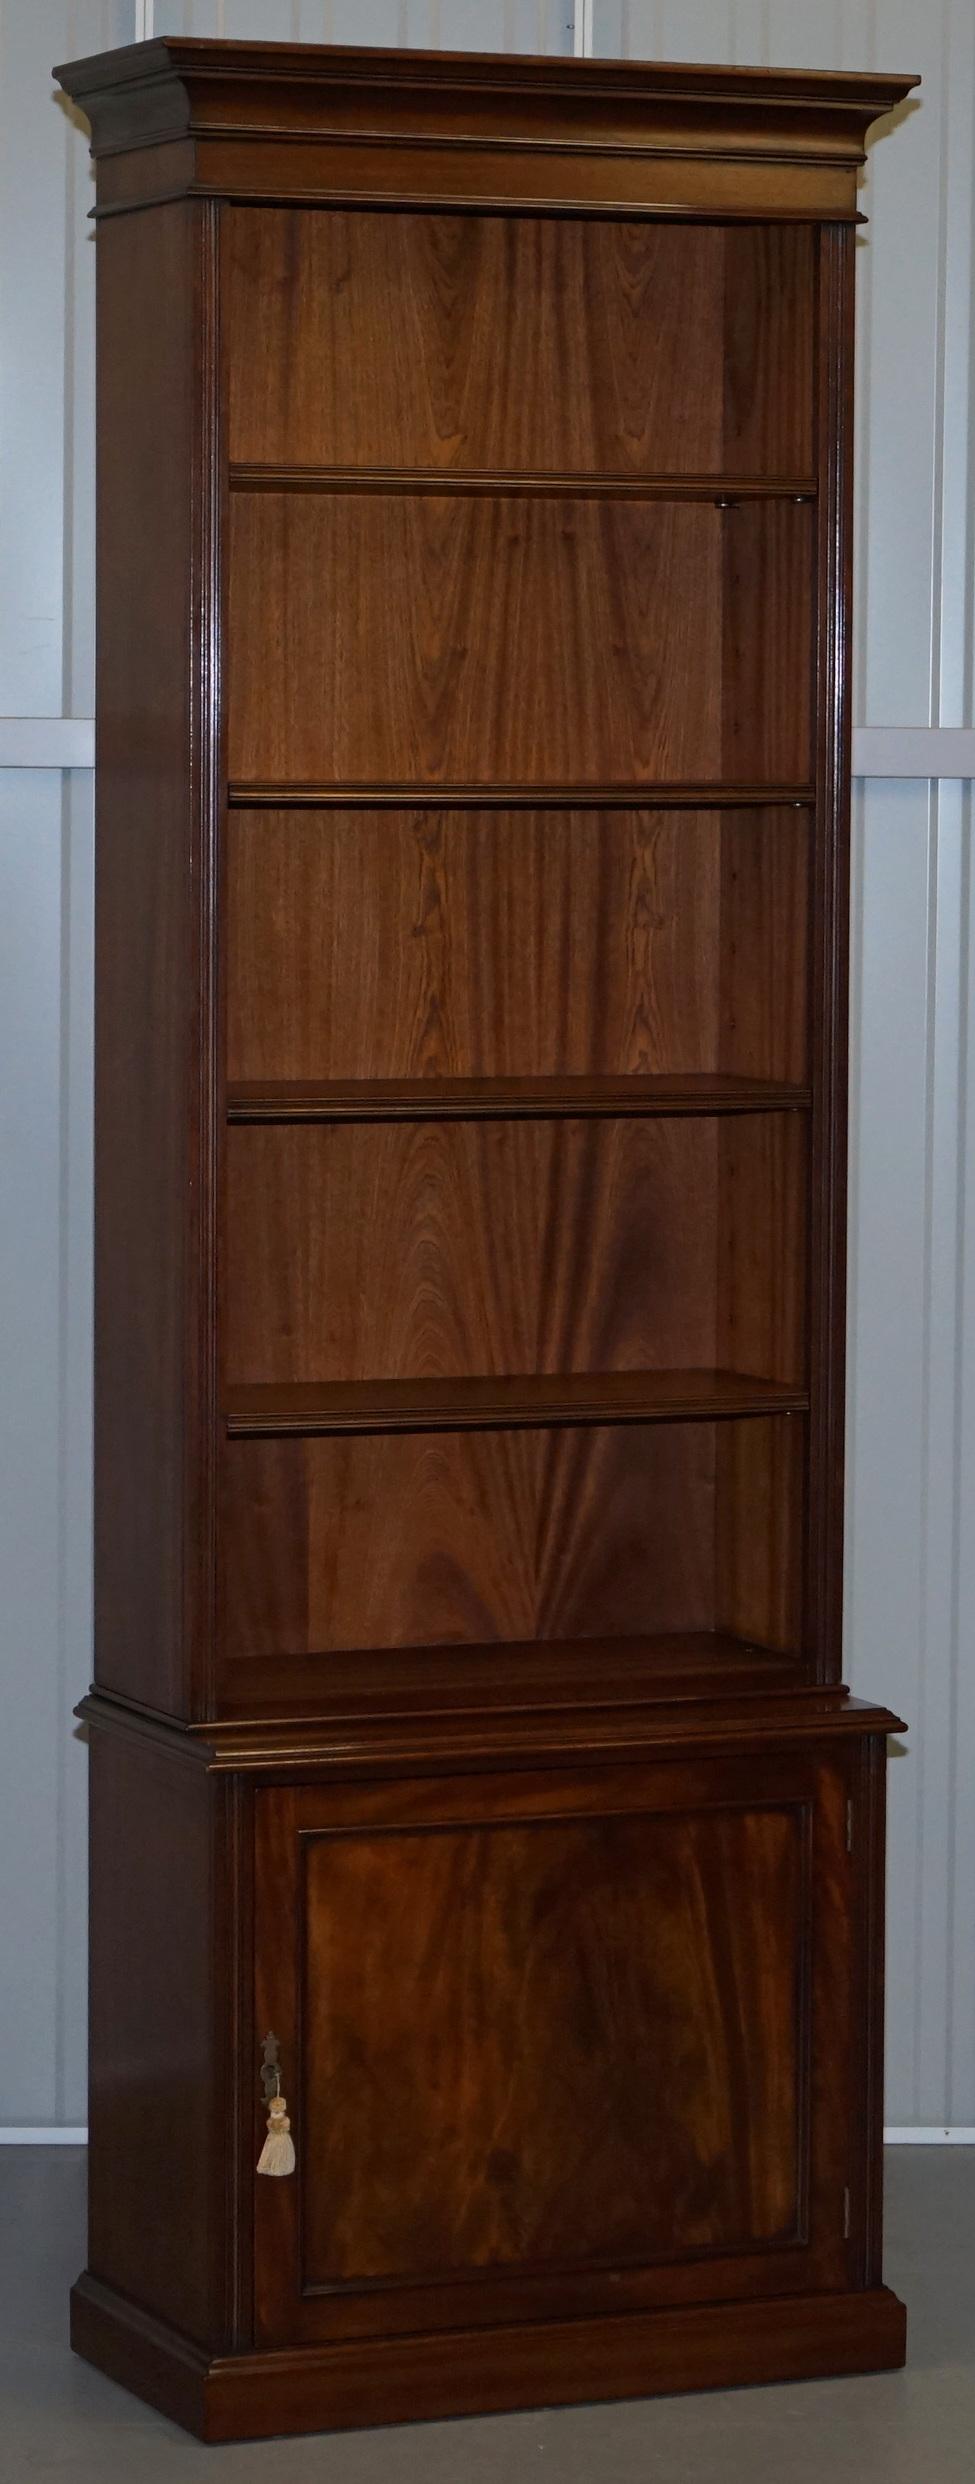 Lovely Pair of Vintage Flamed Mahogany Library Bookcases with Cupboard Bases 8